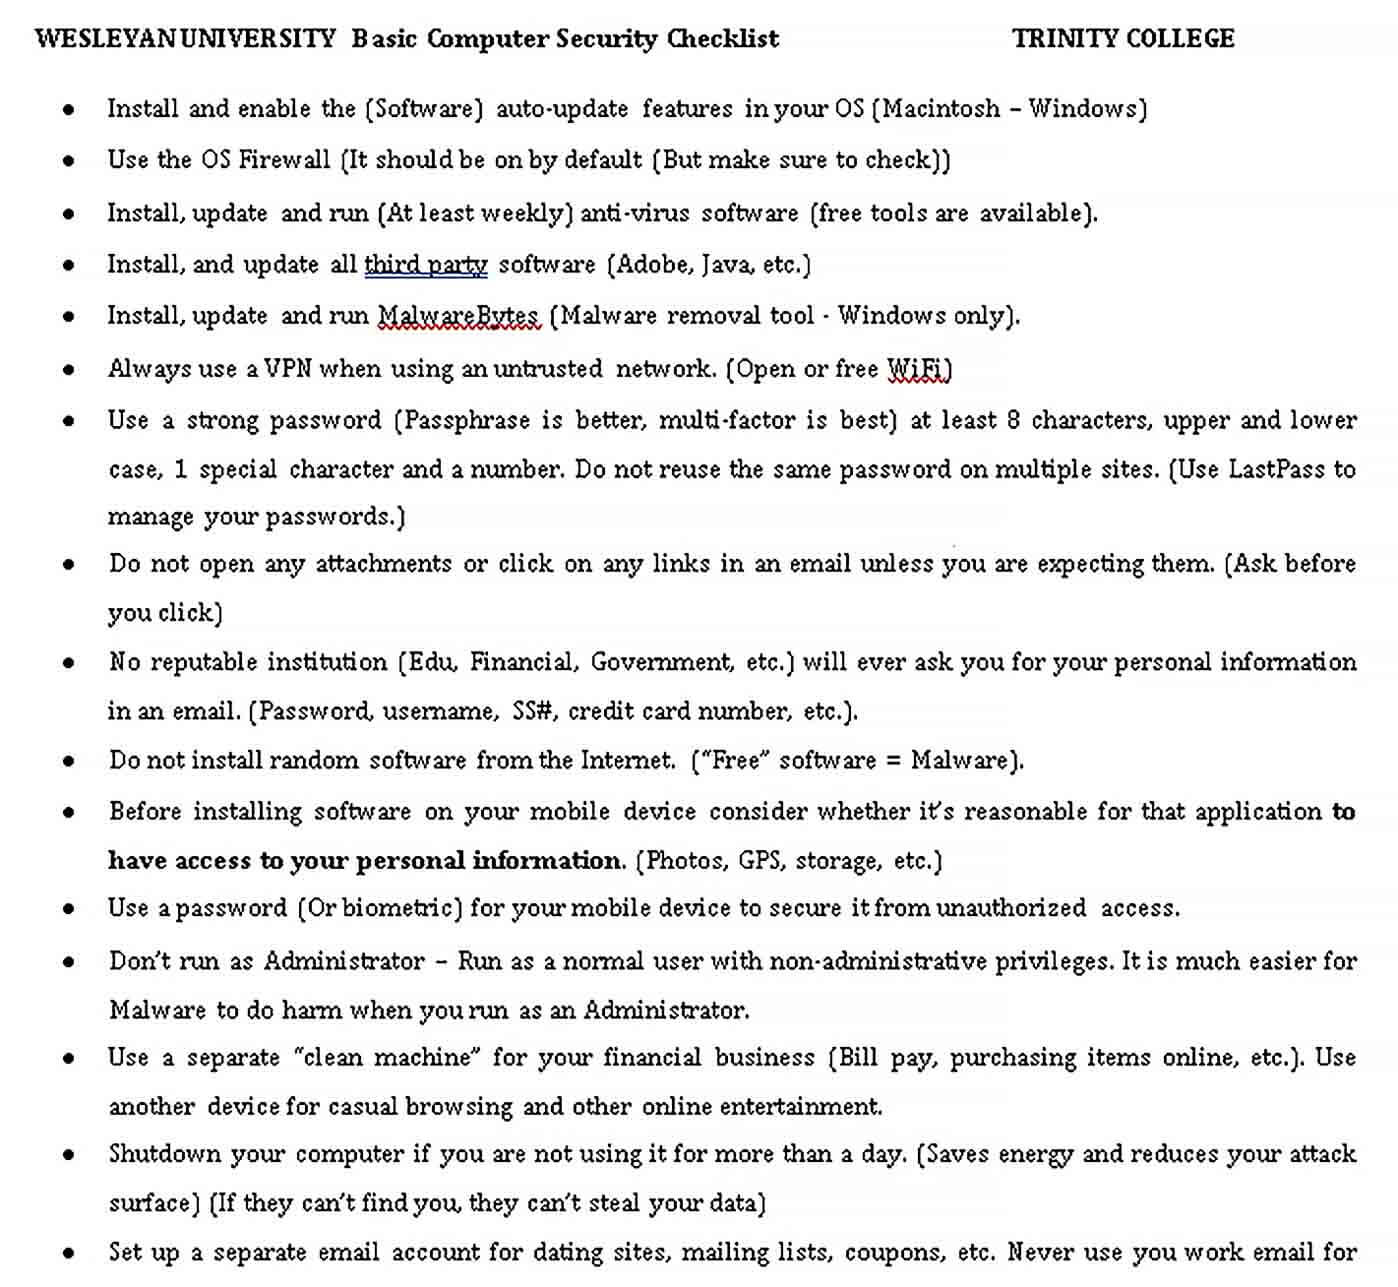 Sample Basic Computer Security Checklist Example